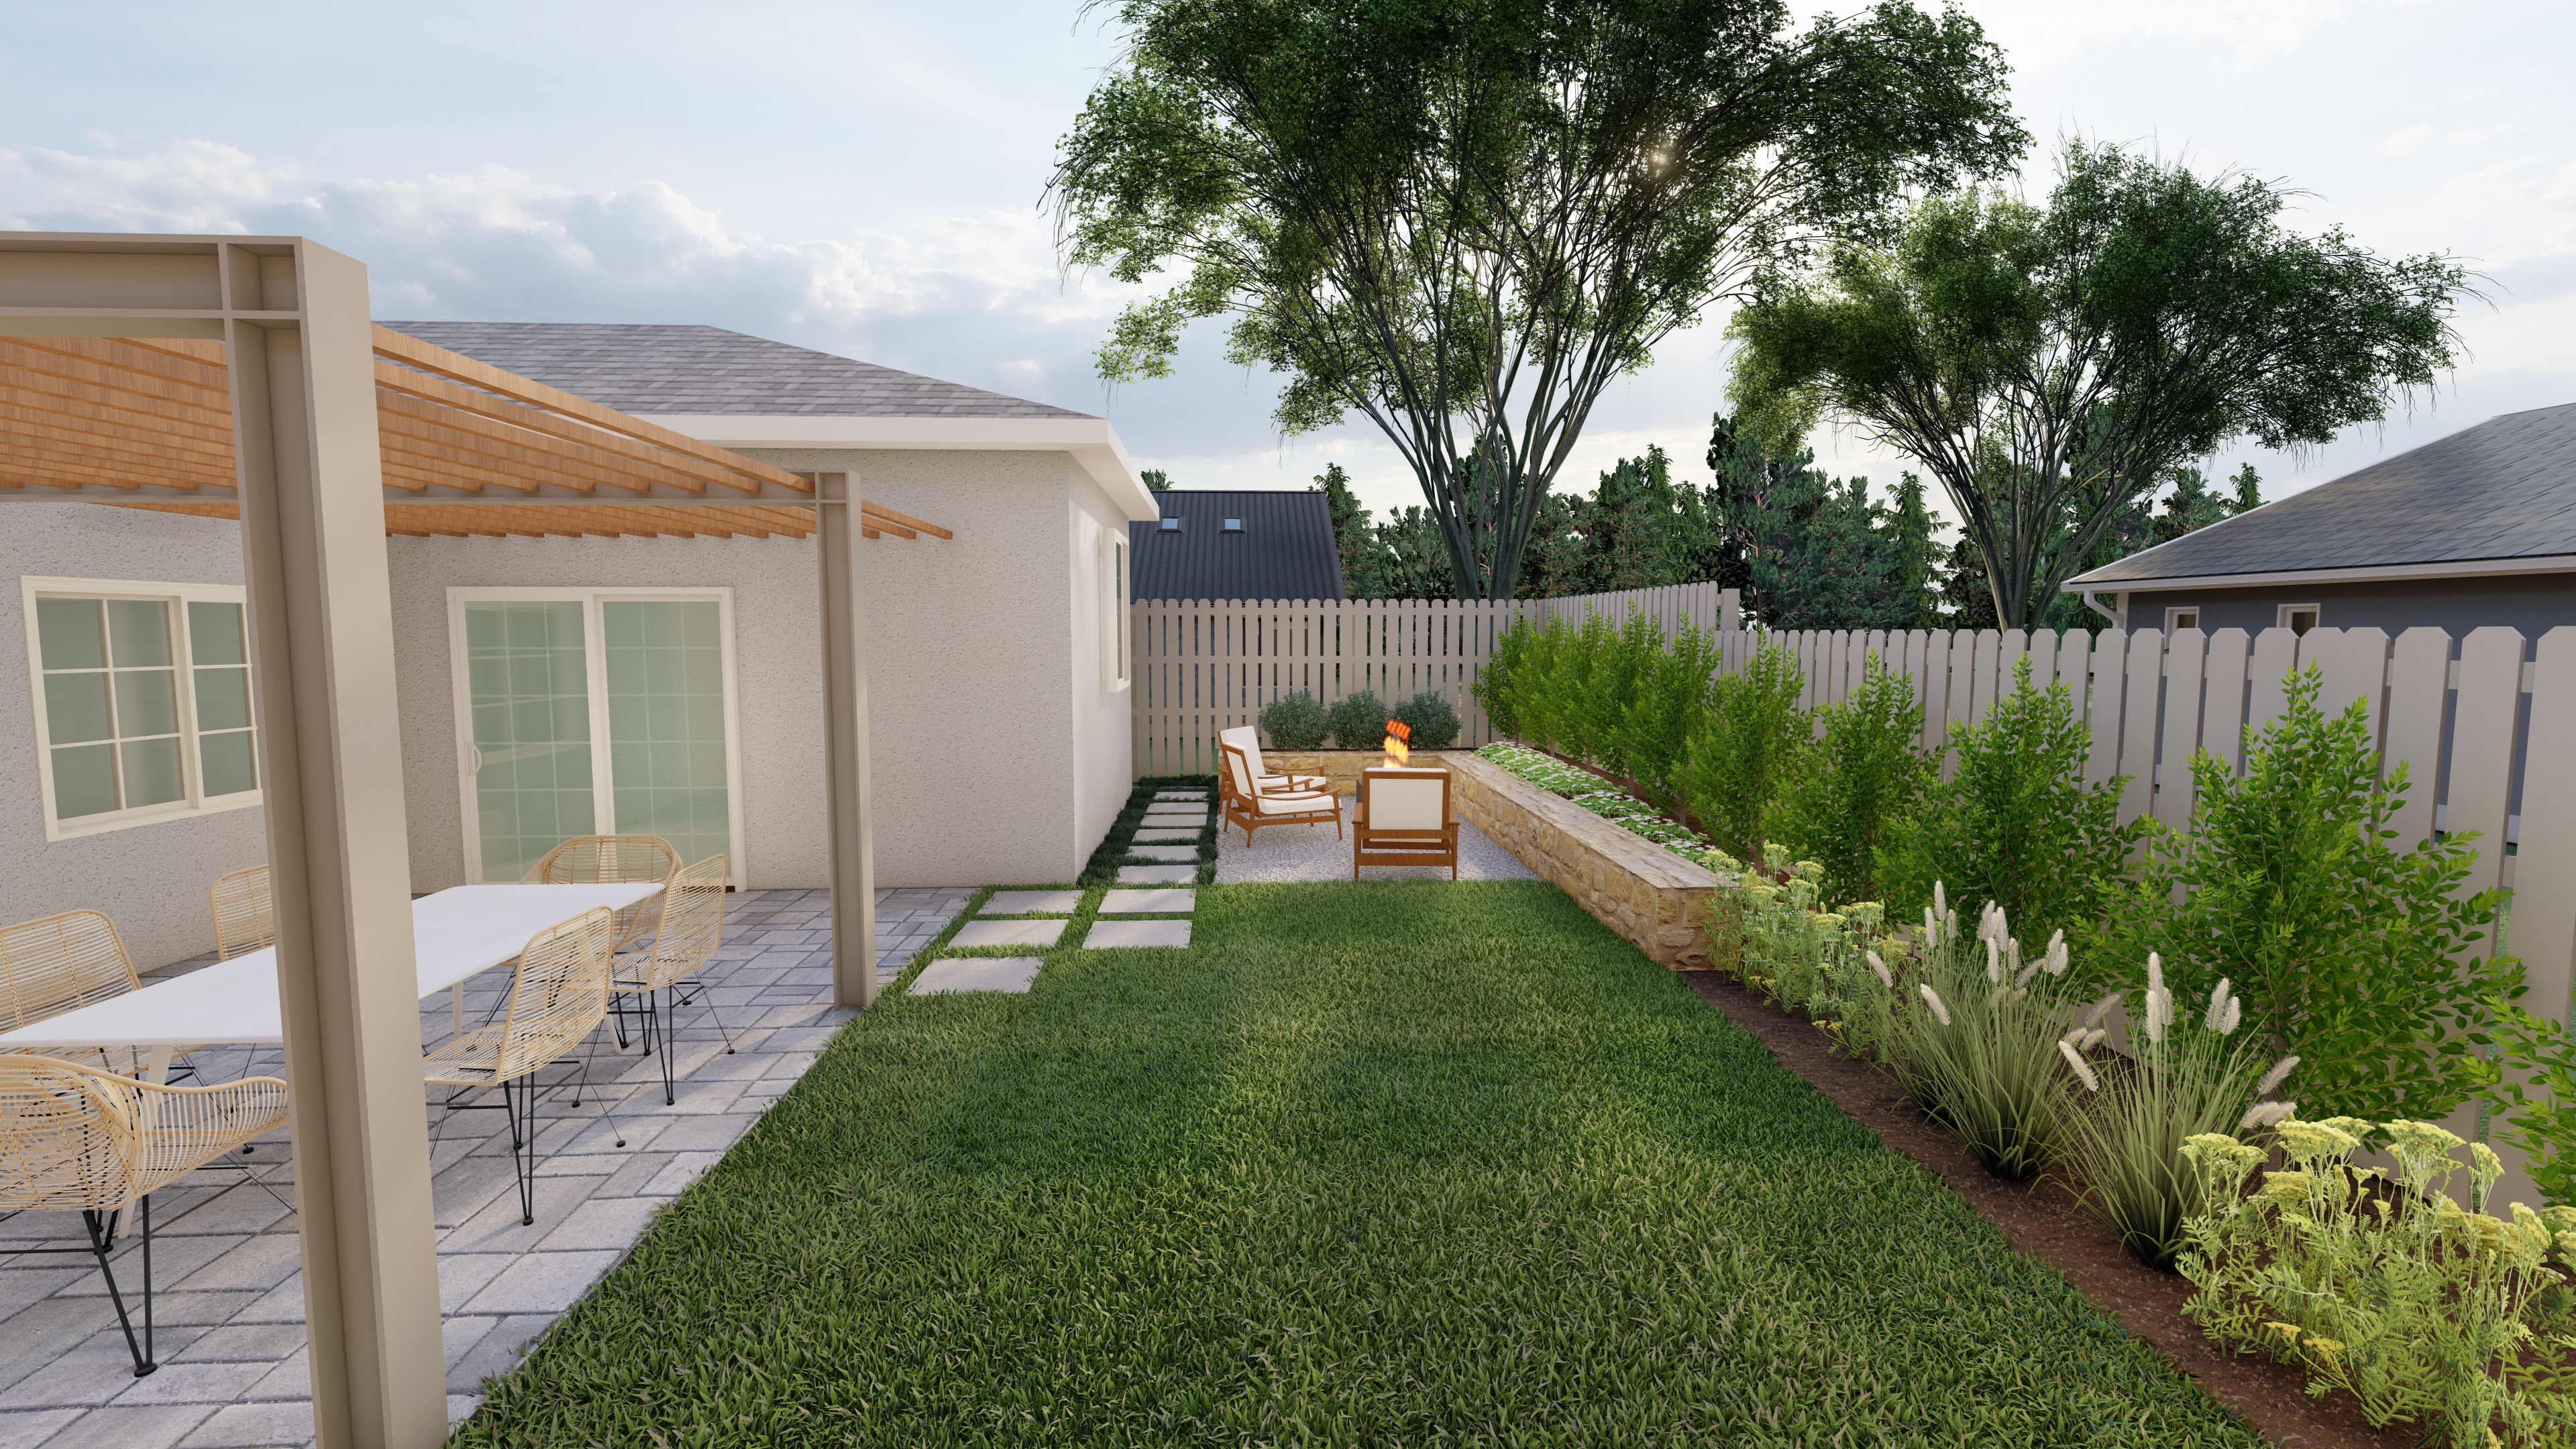 In a tiny backyard, edge your yard for clean lines